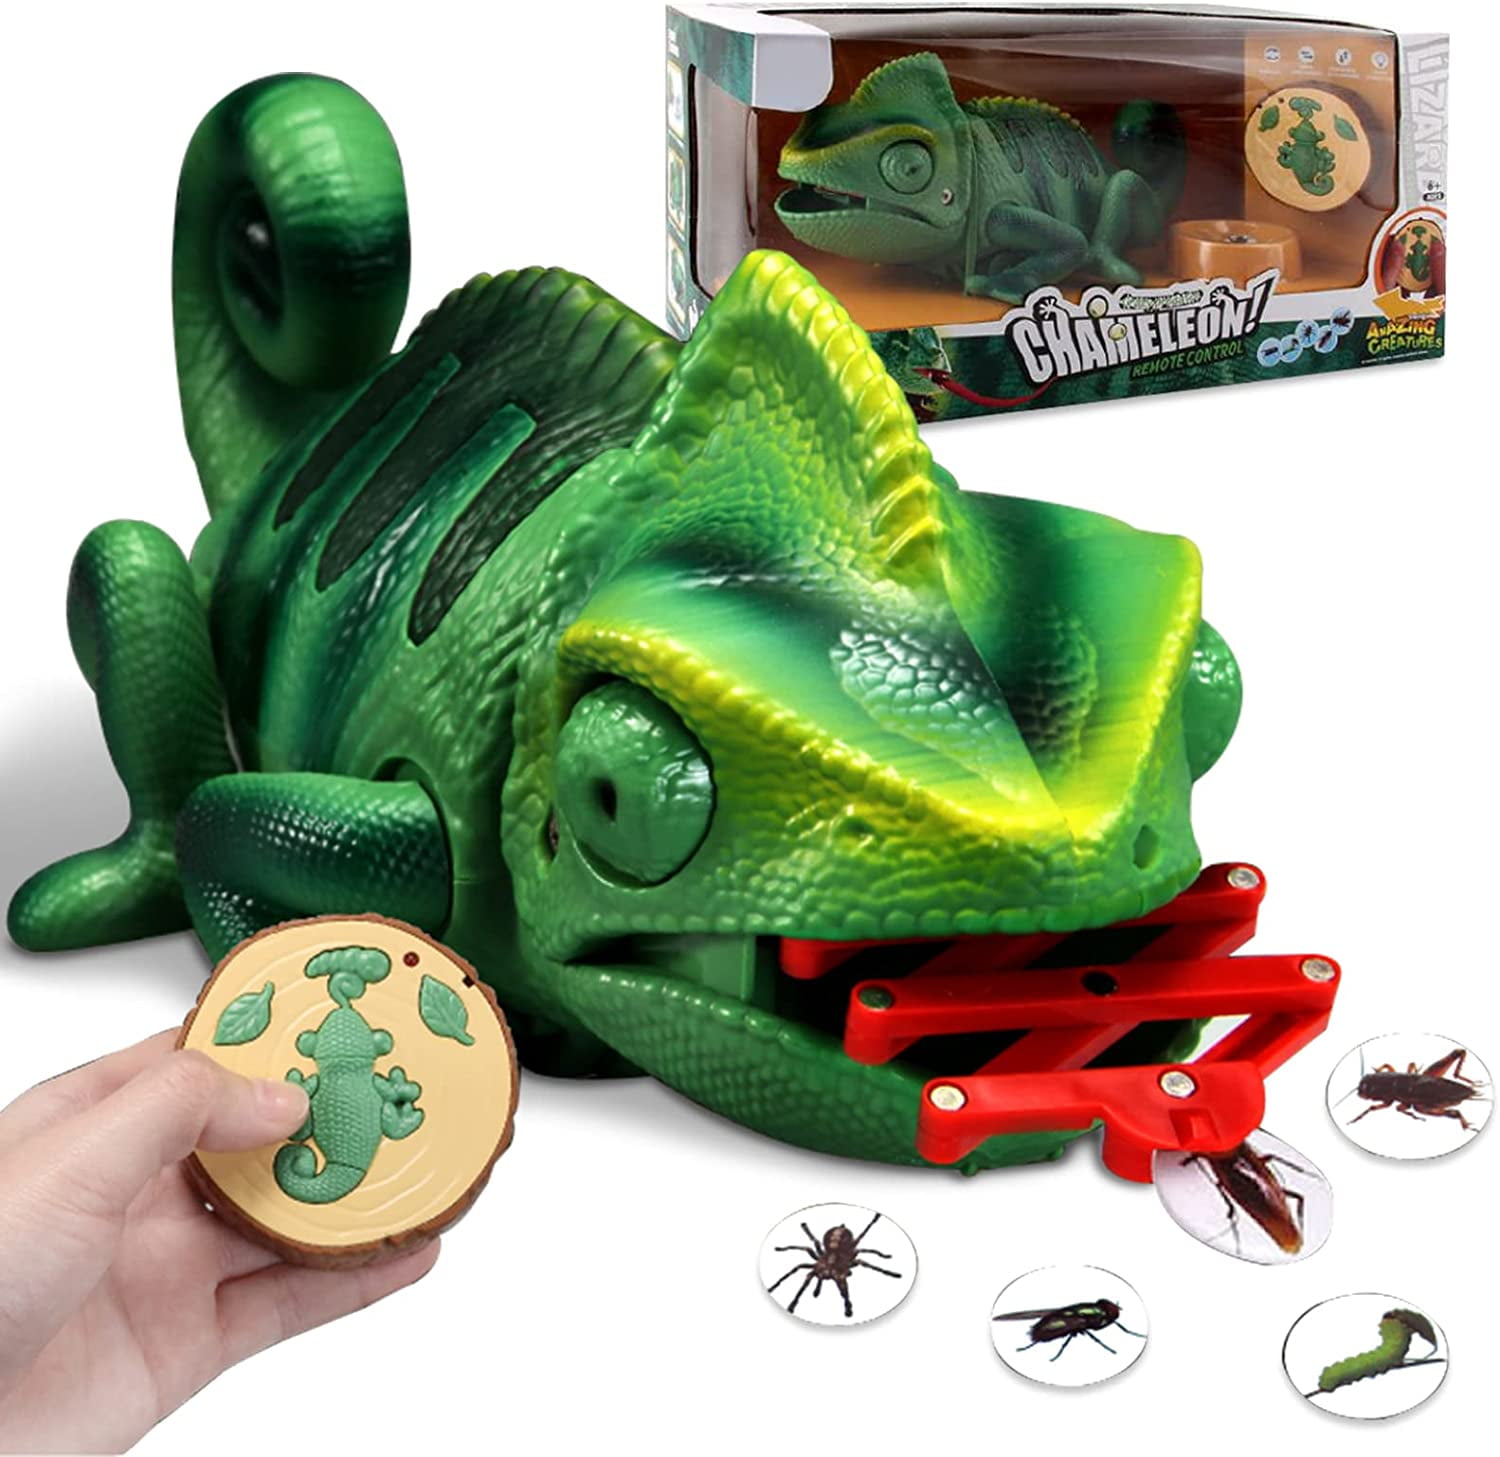 Remote Control Chameleon Animal Toys - RC Gifts Toys for Boys Kids Age 6-12  Years Old Christmas, LED Light Up & Catch Treats Electronic Color Changing,  Walking Movement, Moving Eyes 